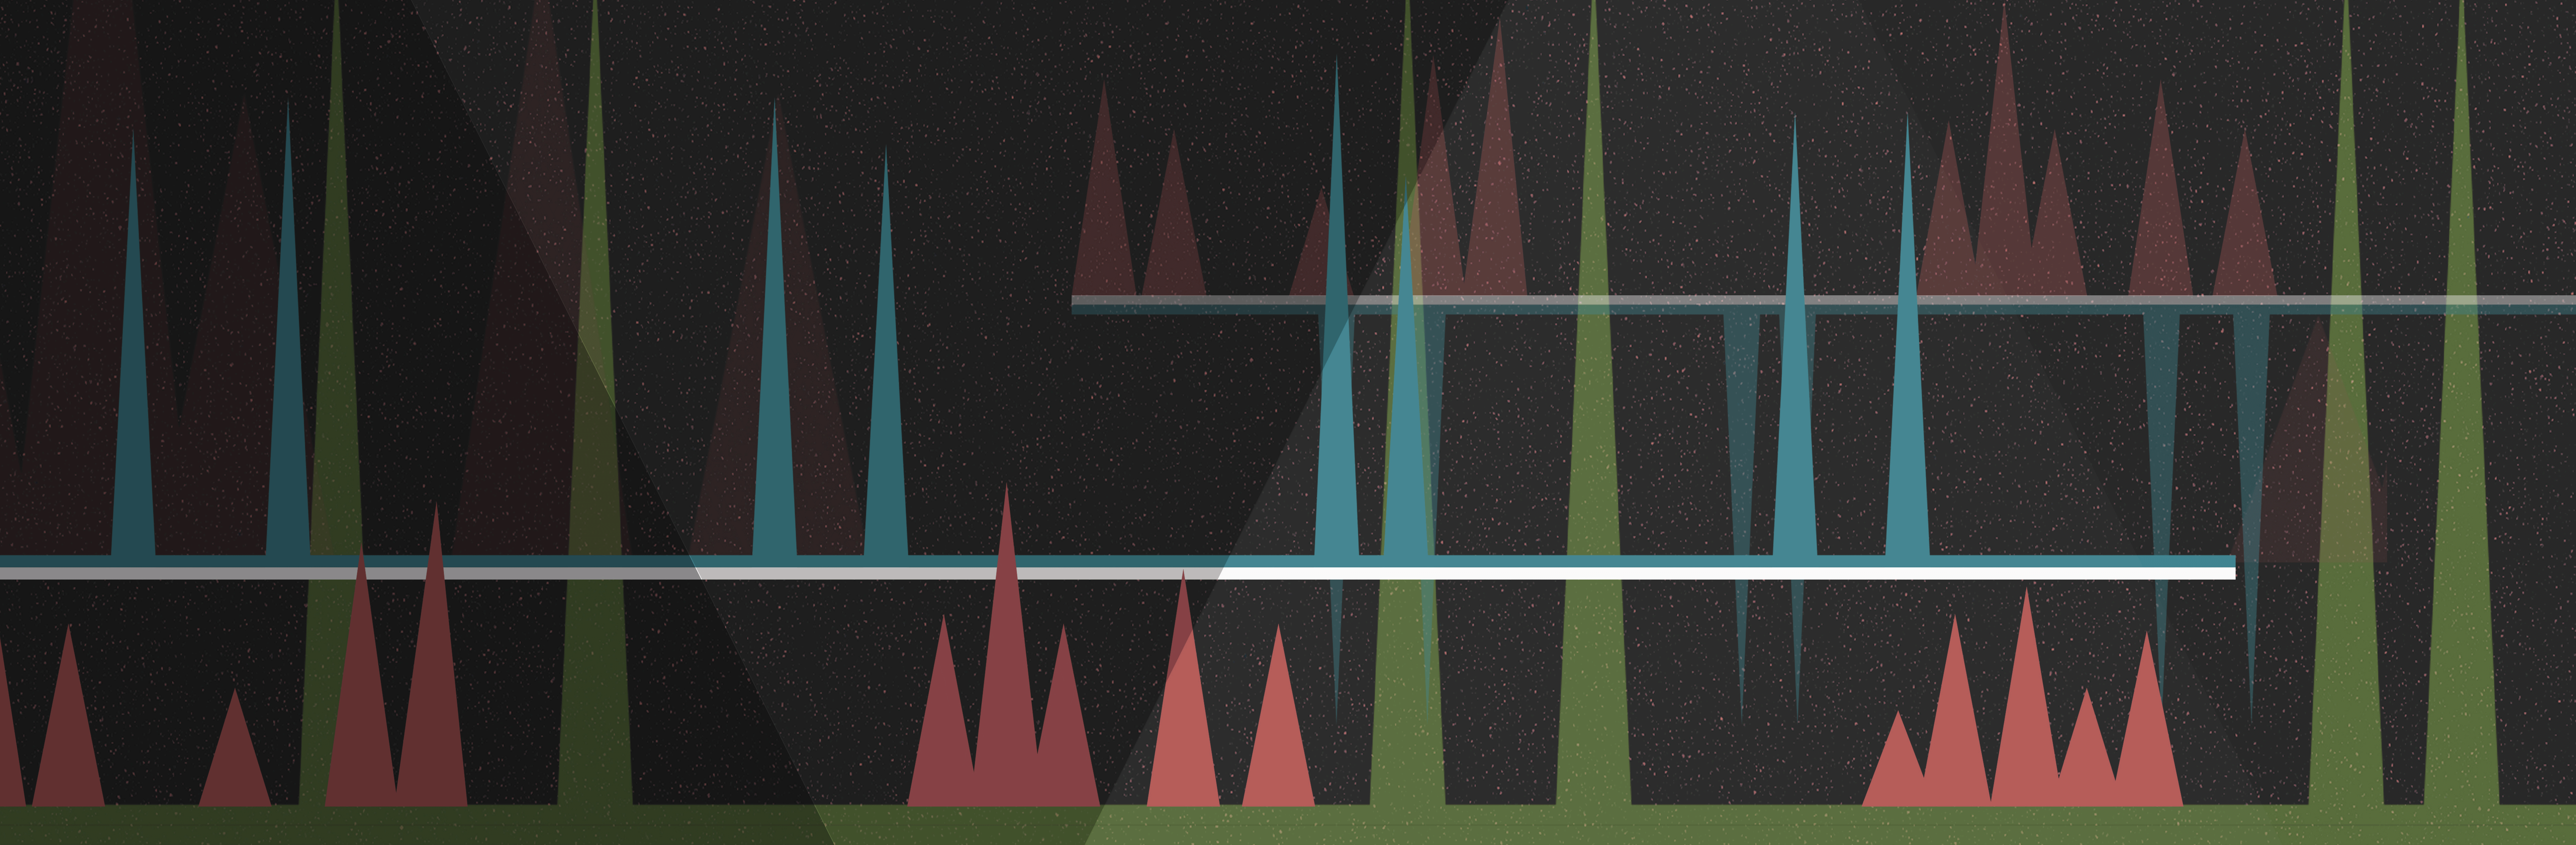 Overlapping, multicolored spikes on a black background that are abstract representations of peaks on a chart.